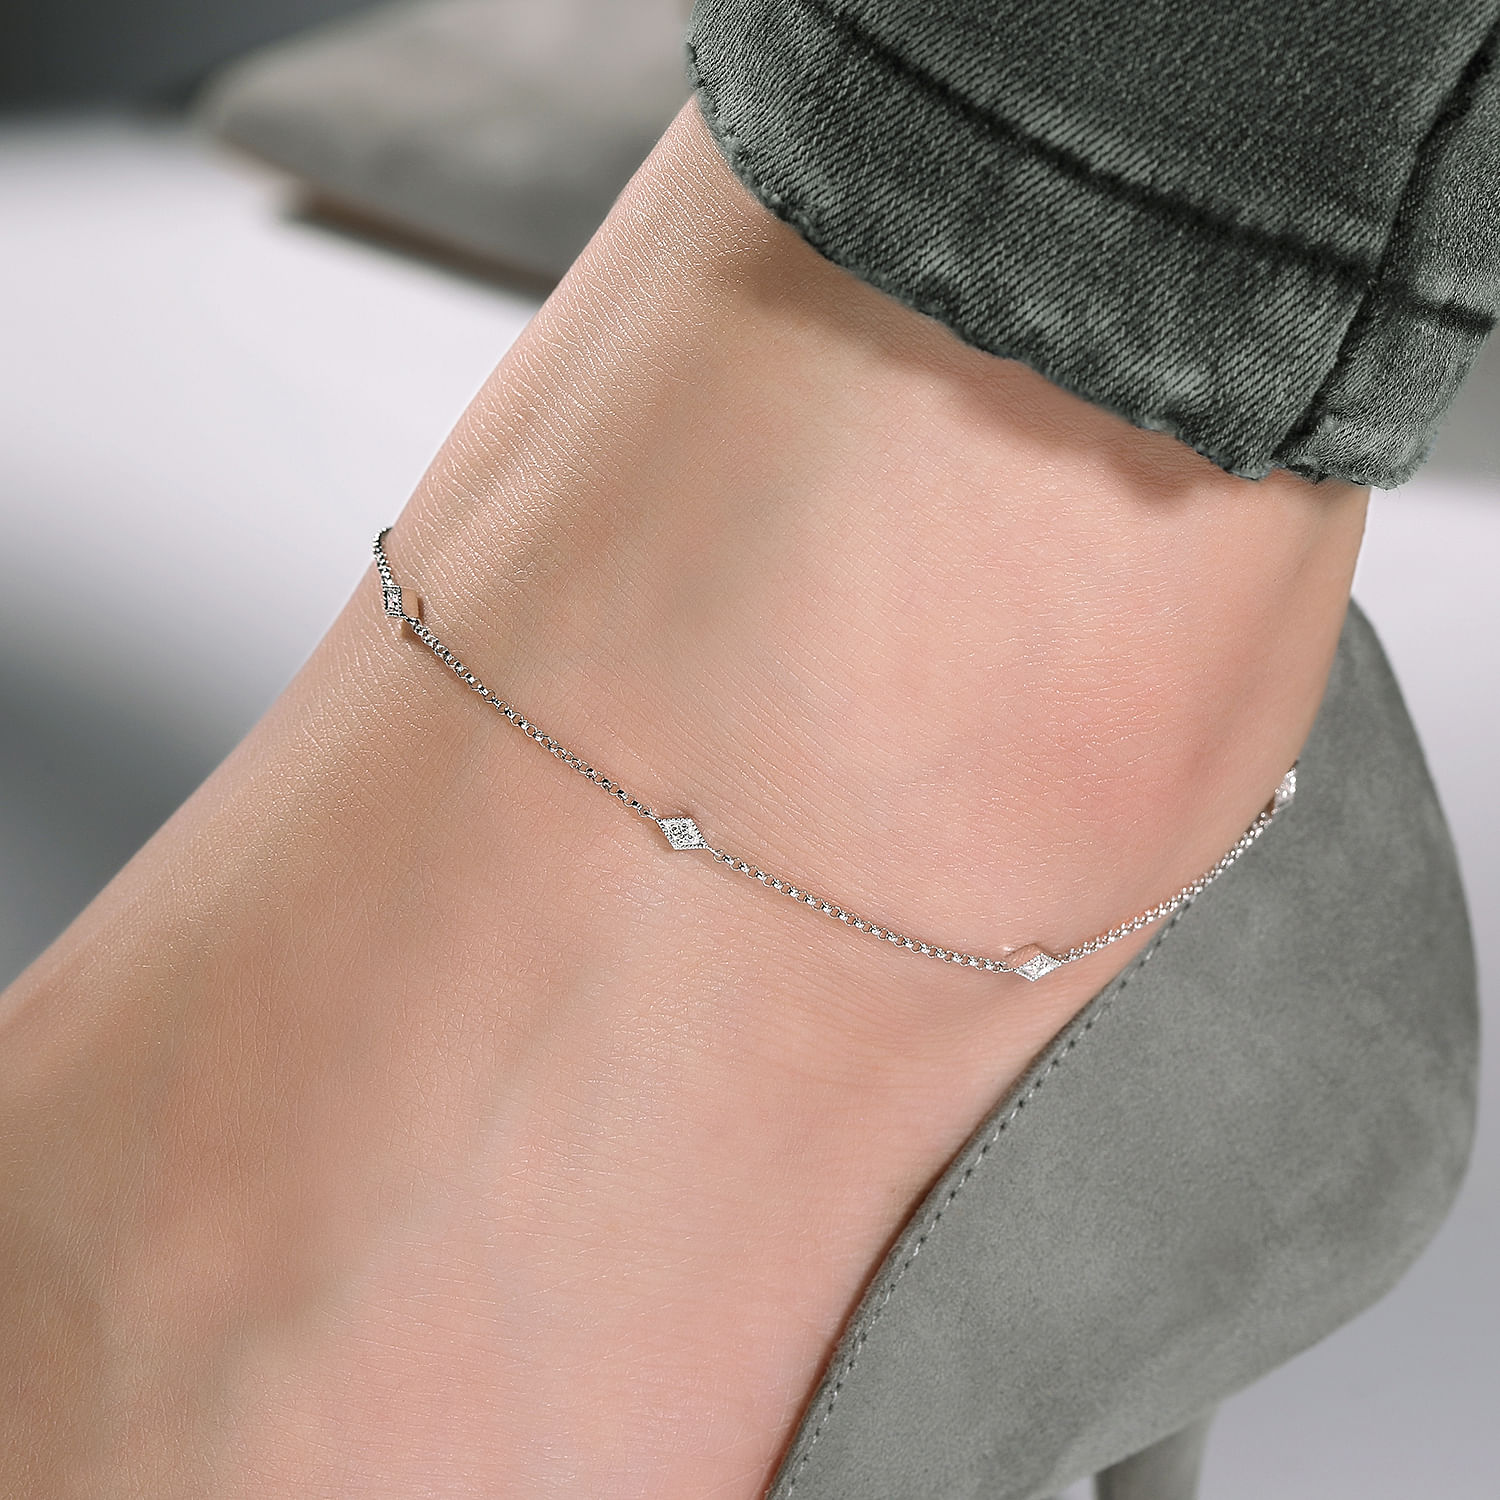 14K White Gold Ankle Bracelet with Marquise Shaped Diamond Stations